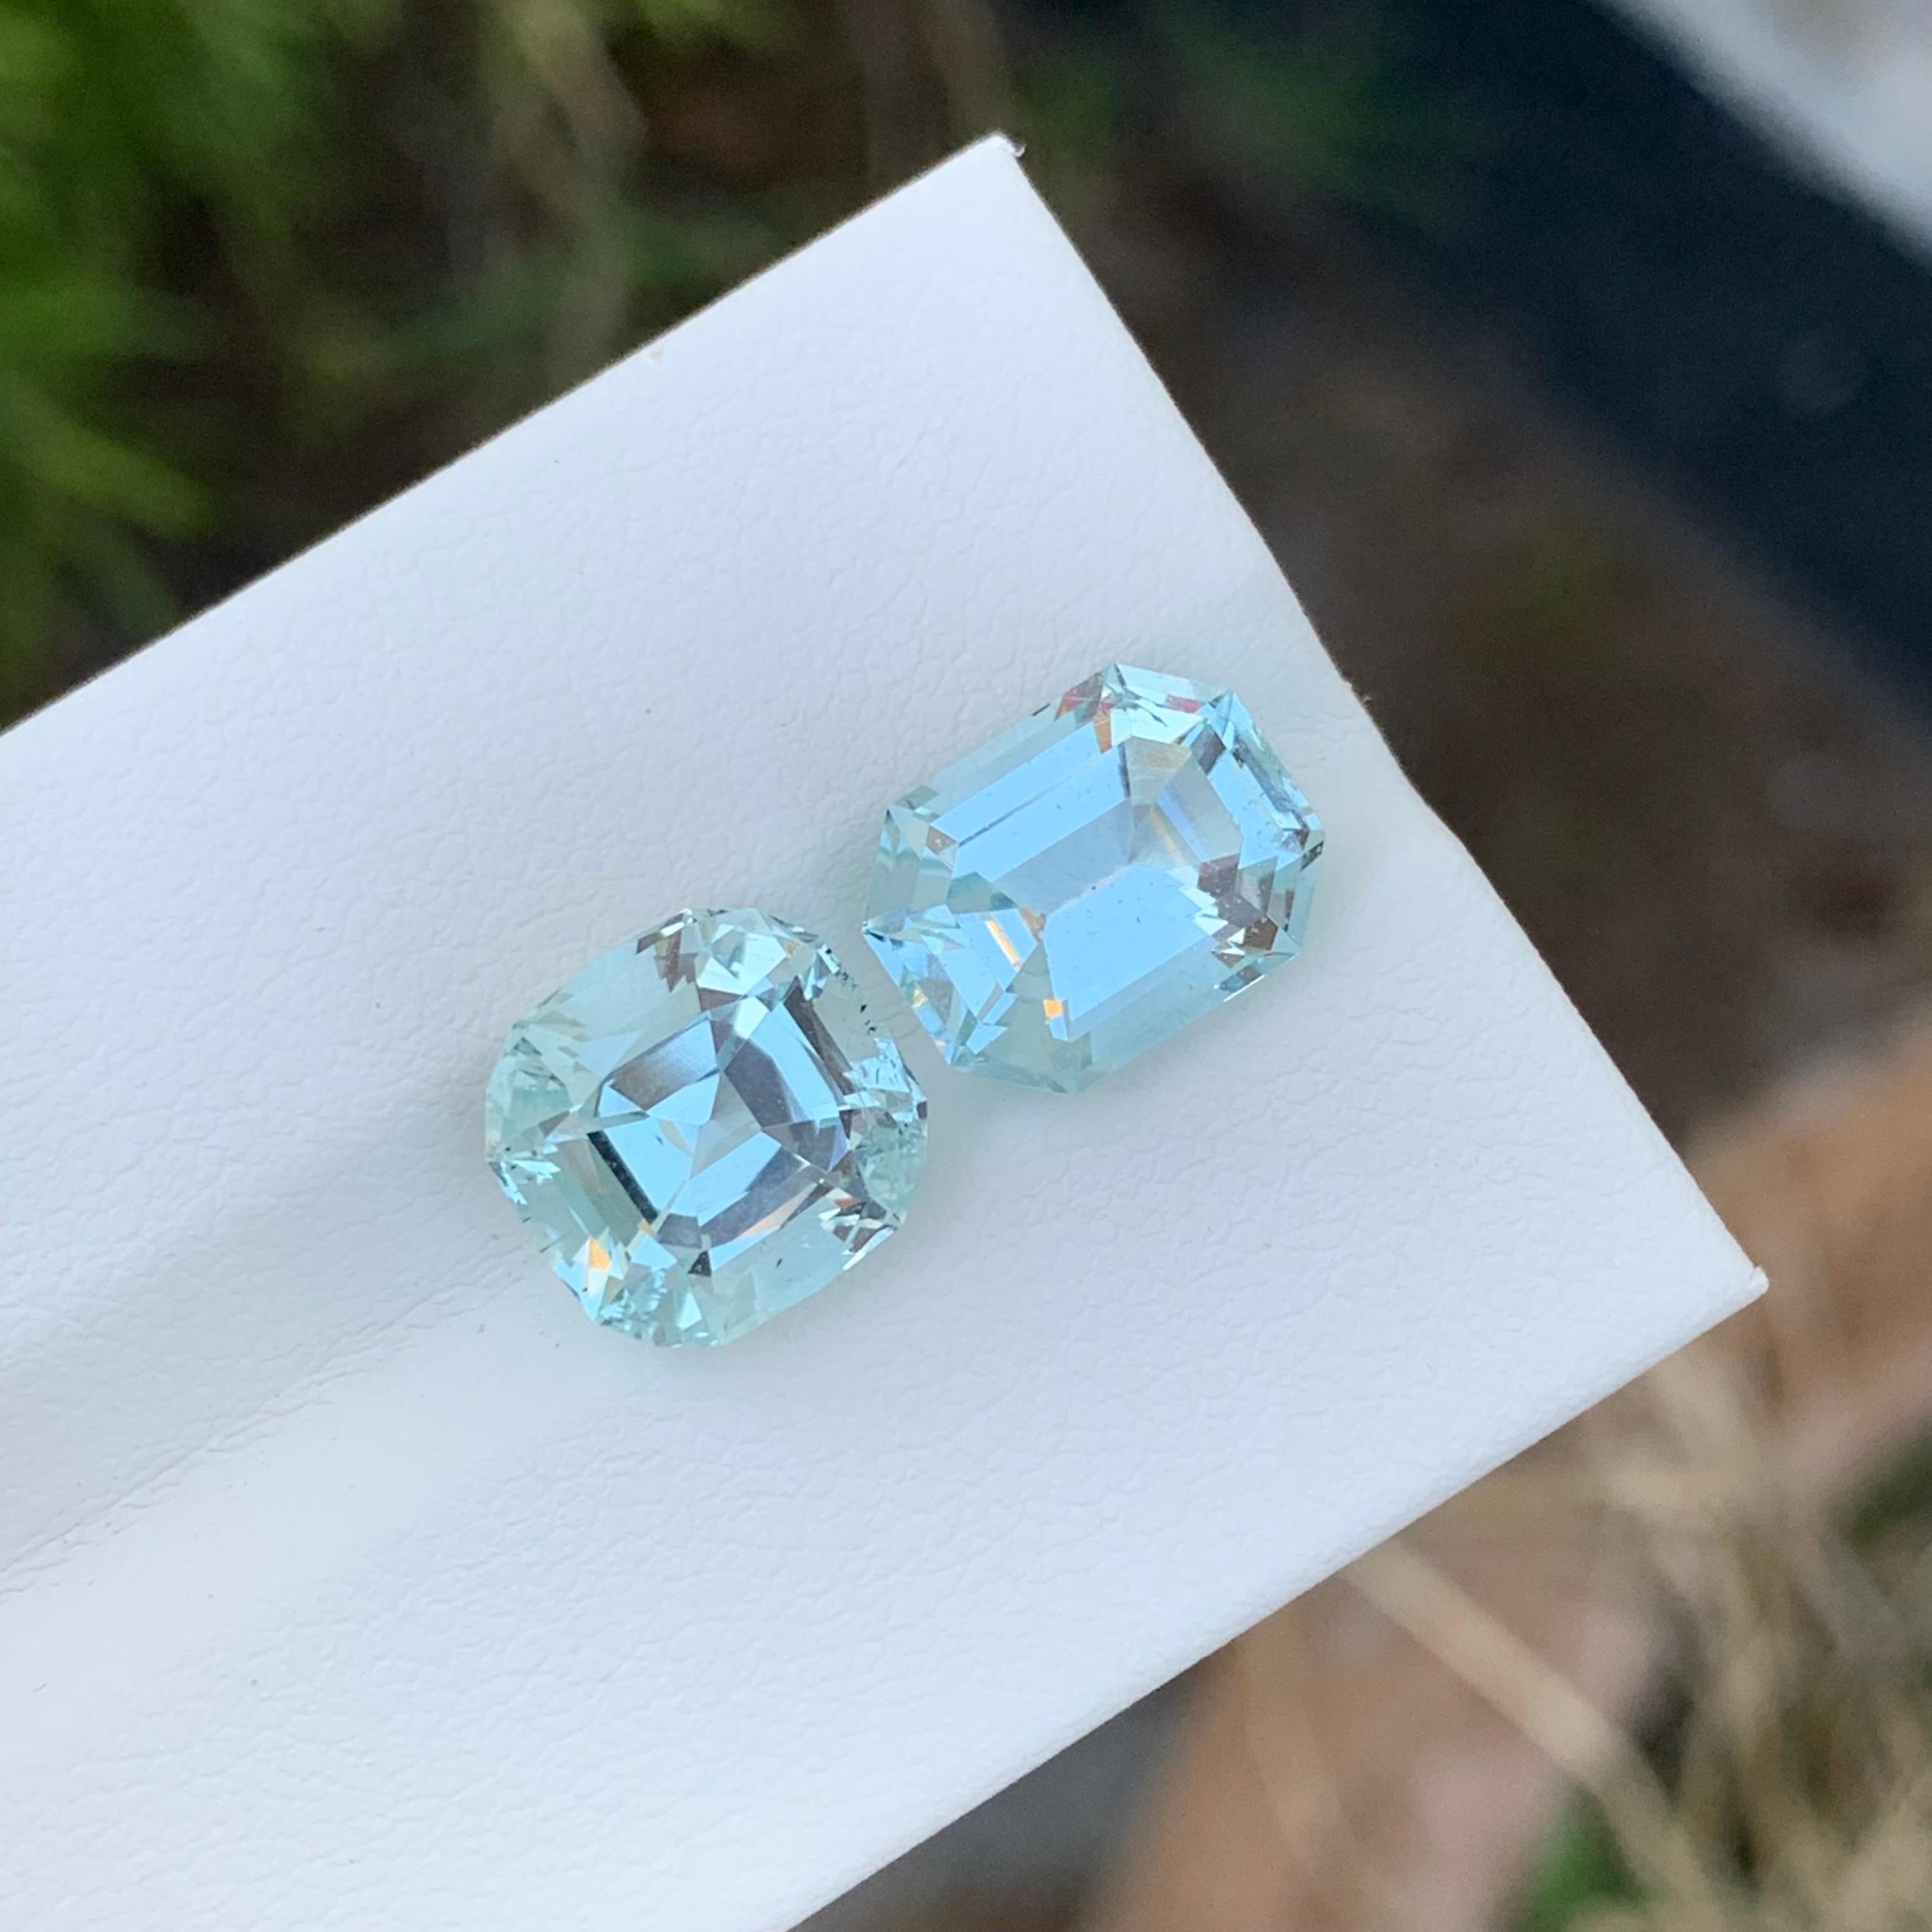 Loose Aquamarine Duo 
Weight: 7 Carat
Dimension: 10.6 x 8.2 x 5.9 Mm And 
                    9.6 x 9.2 x 6.9 Mm
Colour : Pale Blue
Origin: Shigar Valley, Pakistan
Treatment: Non
Certificate : On Demand
Shape: Cushion 

Aquamarine is a captivating